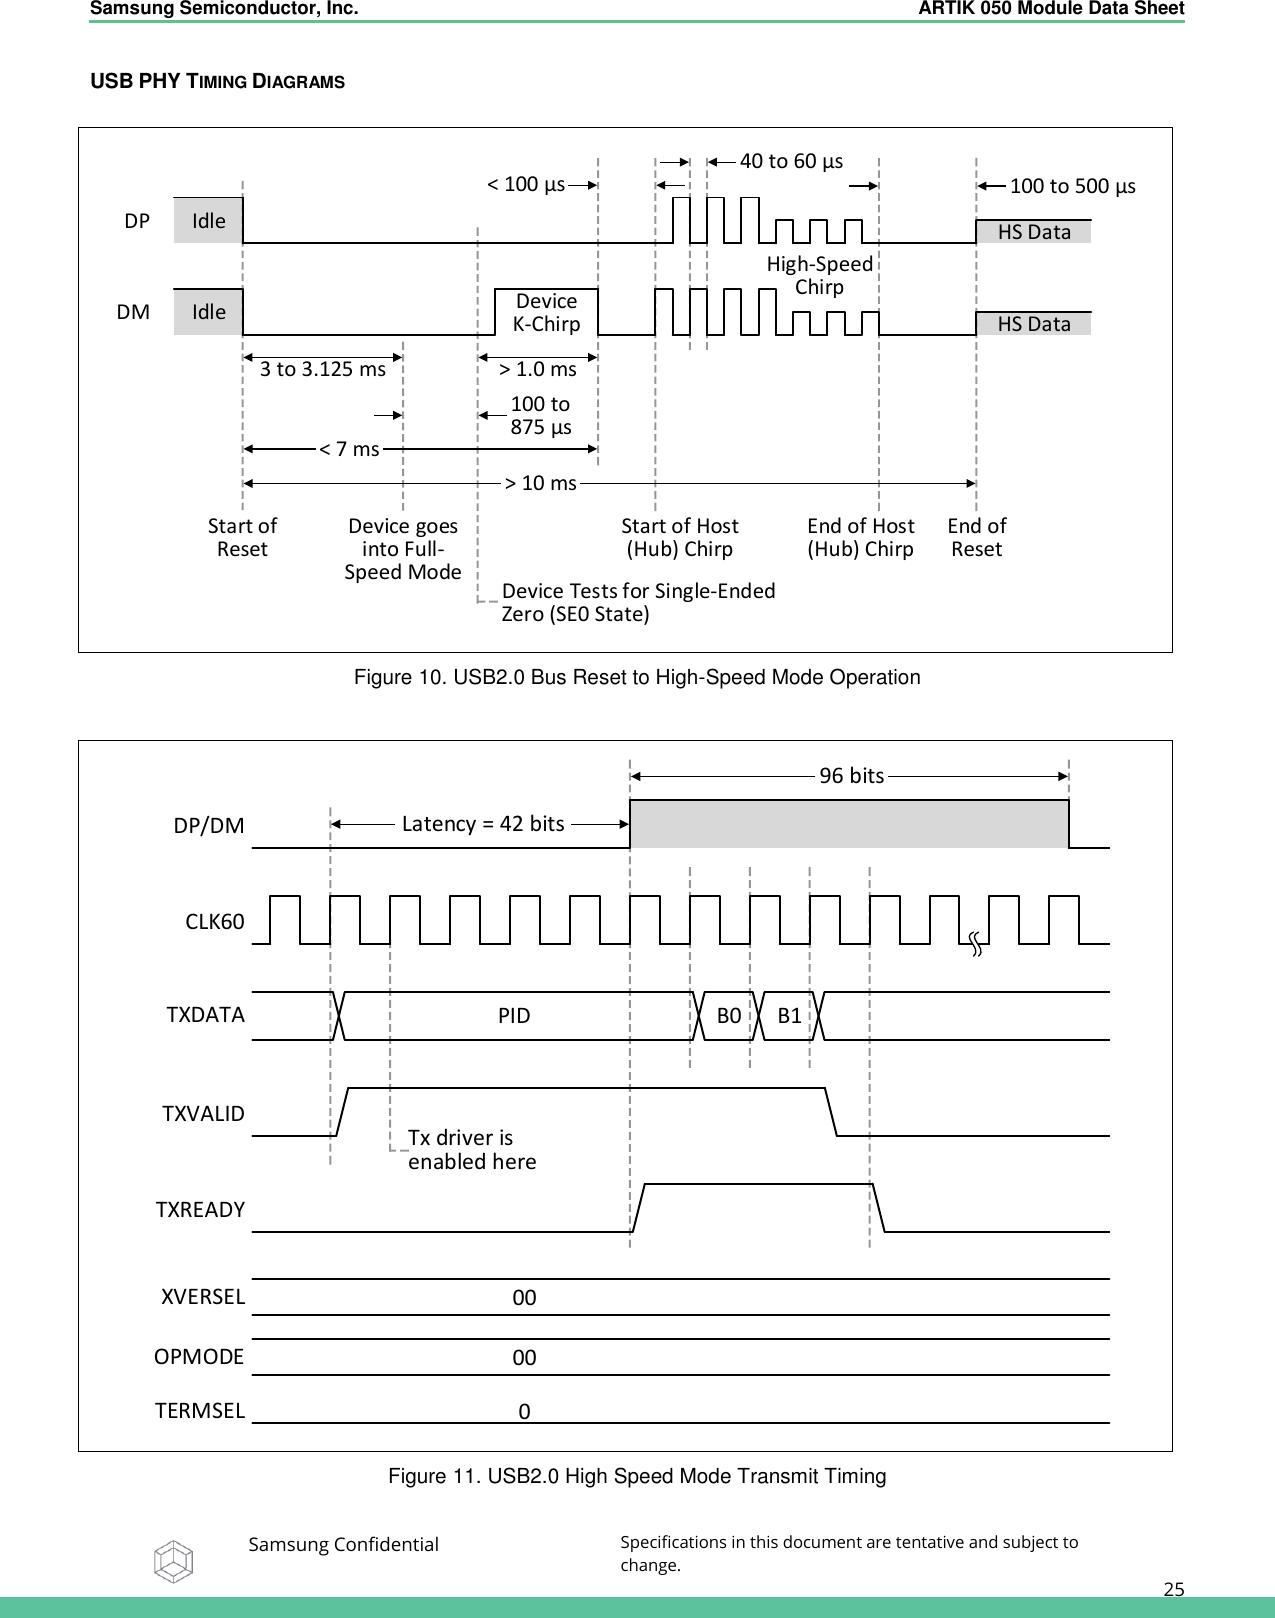 Samsung Semiconductor, Inc.  ARTIK 050 Module Data Sheet   Samsung Confidential Specifications in this document are tentative and subject to change.  25 USB PHY TIMING DIAGRAMS   Figure 10. USB2.0 Bus Reset to High-Speed Mode Operation   Figure 11. USB2.0 High Speed Mode Transmit Timing DM        IdleDP        Idle&lt; 100 µs 40 to 60 µs100 to 500 µsHS DataHS Data&gt; 1.0 ms3 to 3.125 msDeviceK-Chirp100 to875 µs&lt; 7 ms&gt; 10 msStart of ResetDevice goes into Full-Speed ModeStart of Host (Hub) ChirpDevice Tests for Single-Ended Zero (SE0 State)End of Host (Hub) ChirpEnd of ResetHigh-Speed ChirpCLK60TXDATADP/DMTXVALIDTXREADYXVERSELOPMODETERMSEL00000B0 B1PIDLatency = 42 bits96 bitsTx driver is enabled here